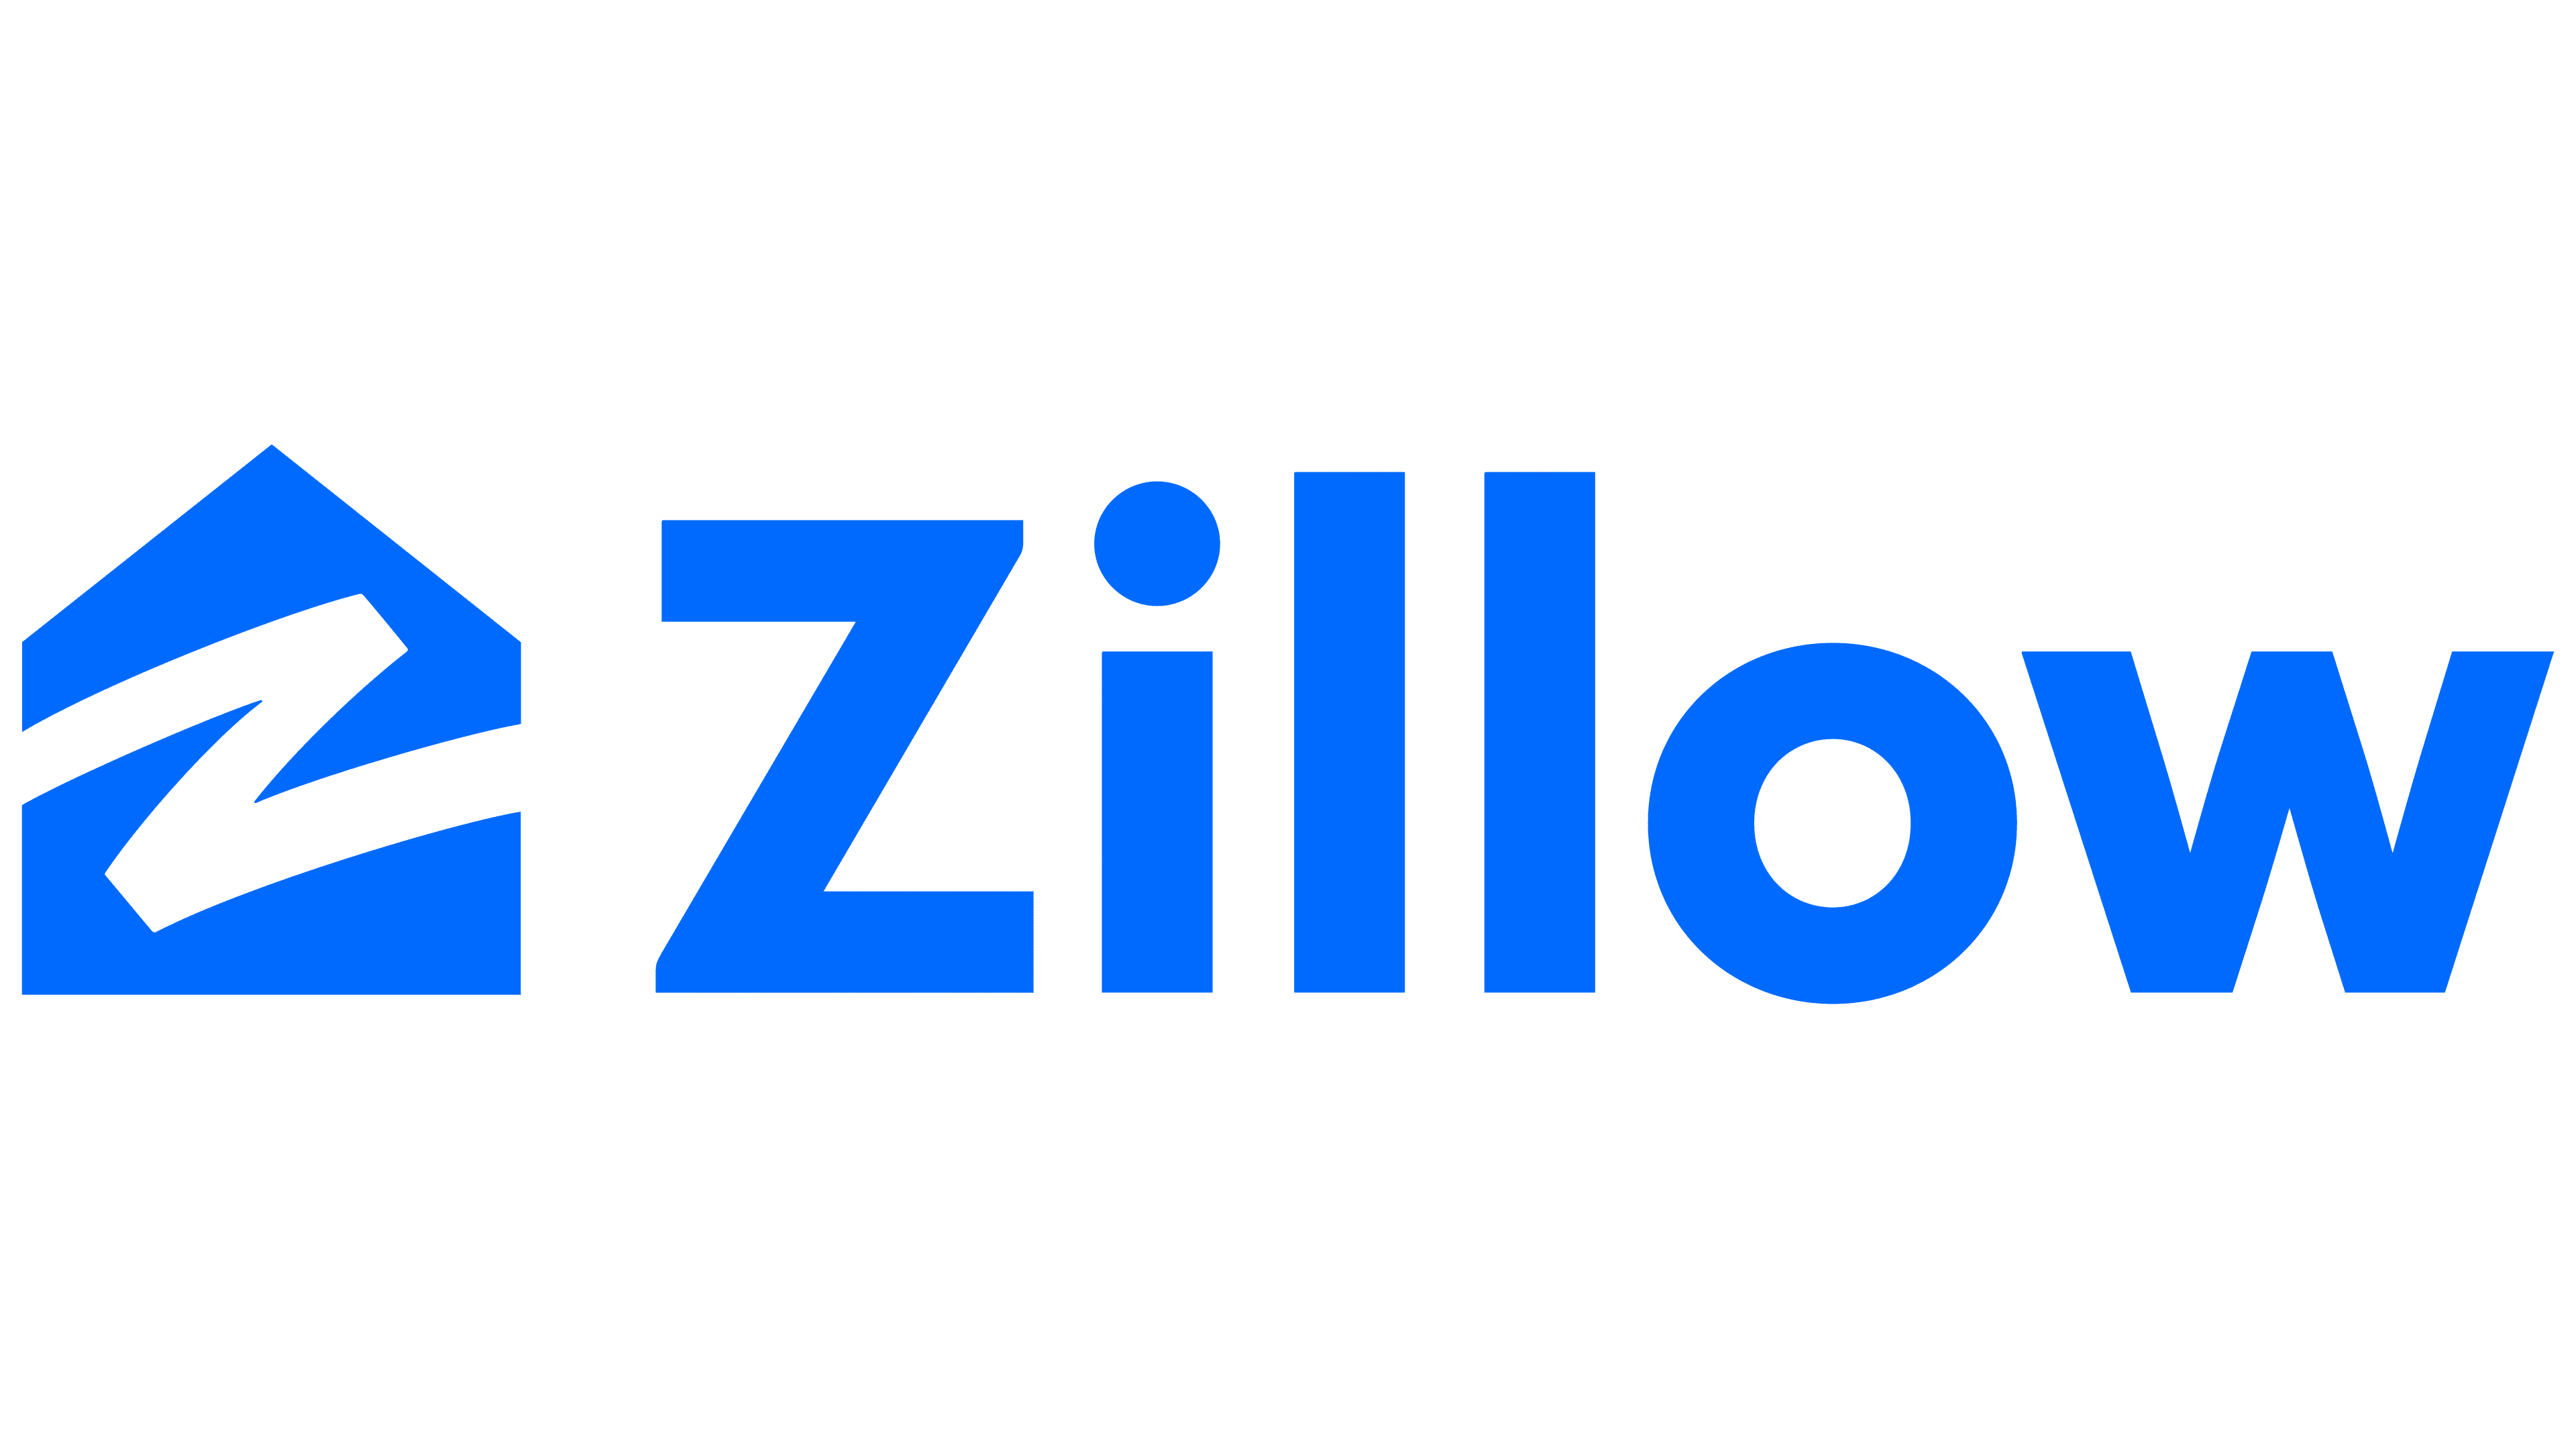 Extract all data from zillow.com